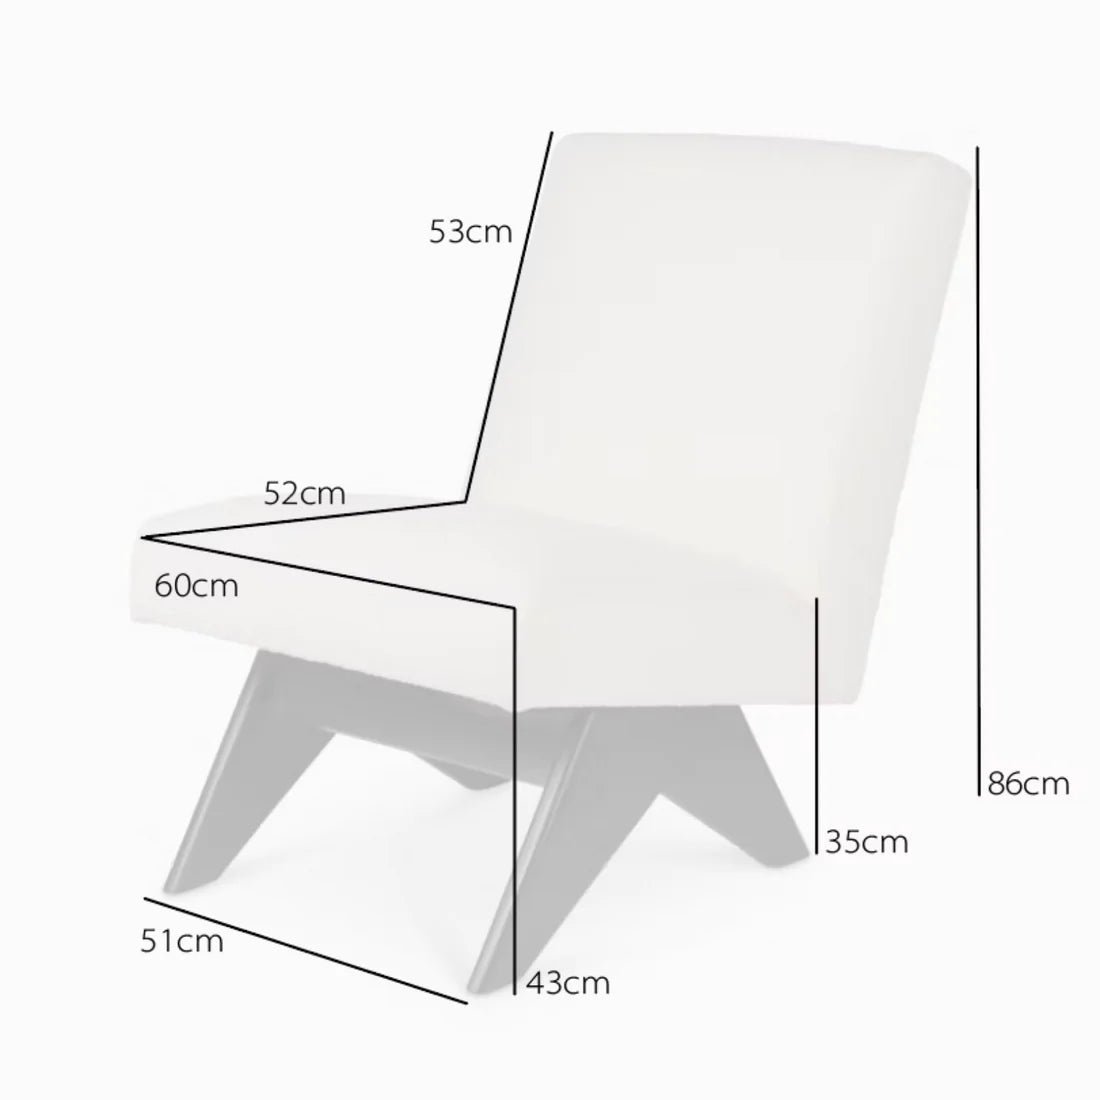 DETJER Easy Lounge Sofa Dimensions of Chair